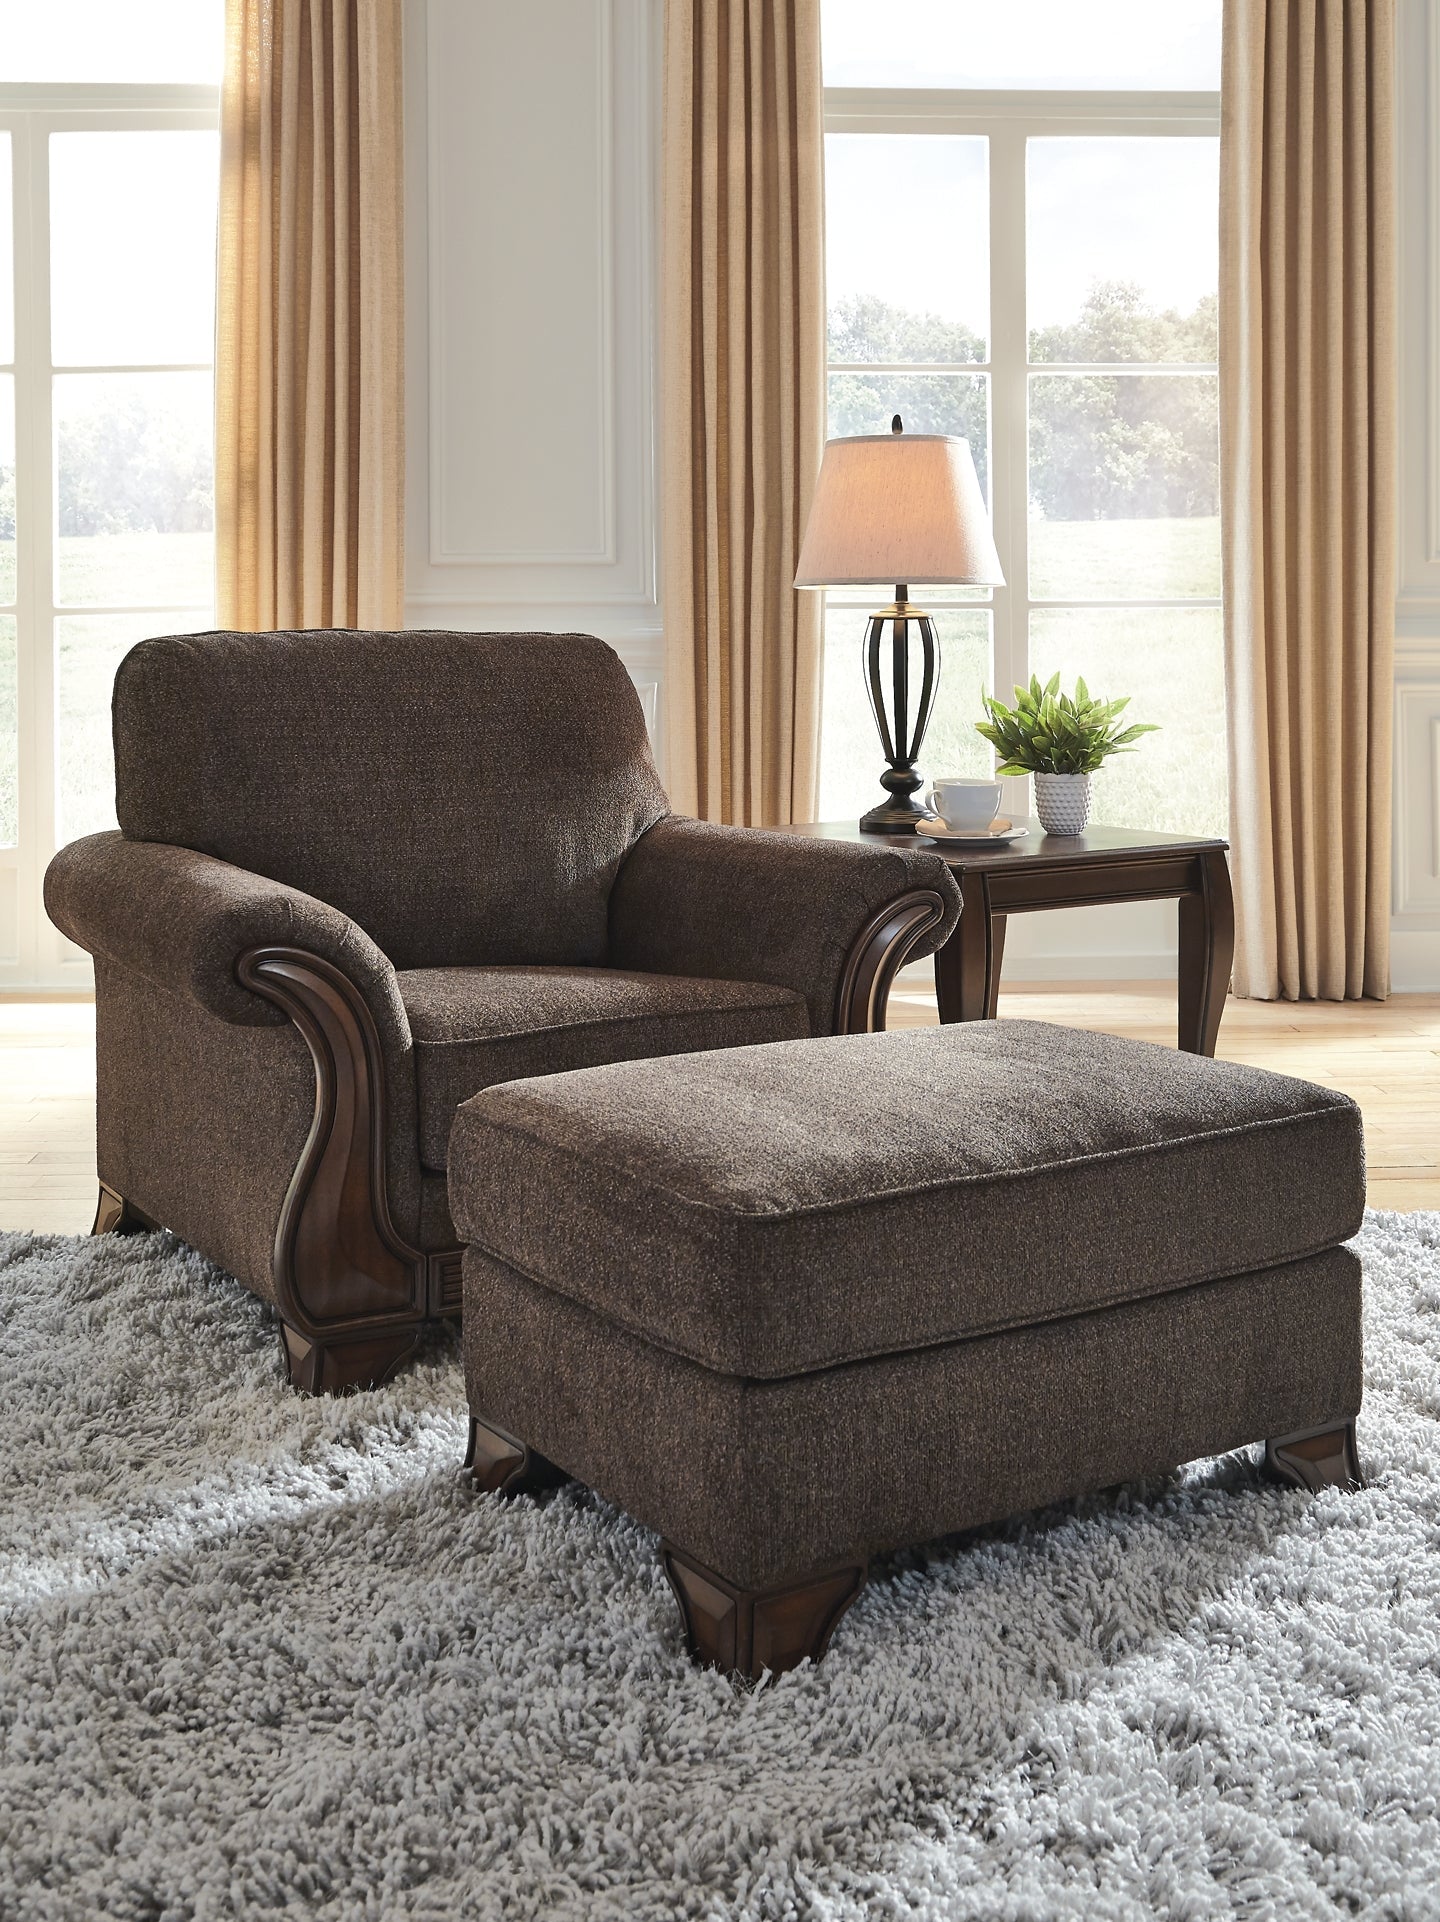 Miltonwood Chair and Ottoman Rent Wise Rent To Own Jacksonville, Florida